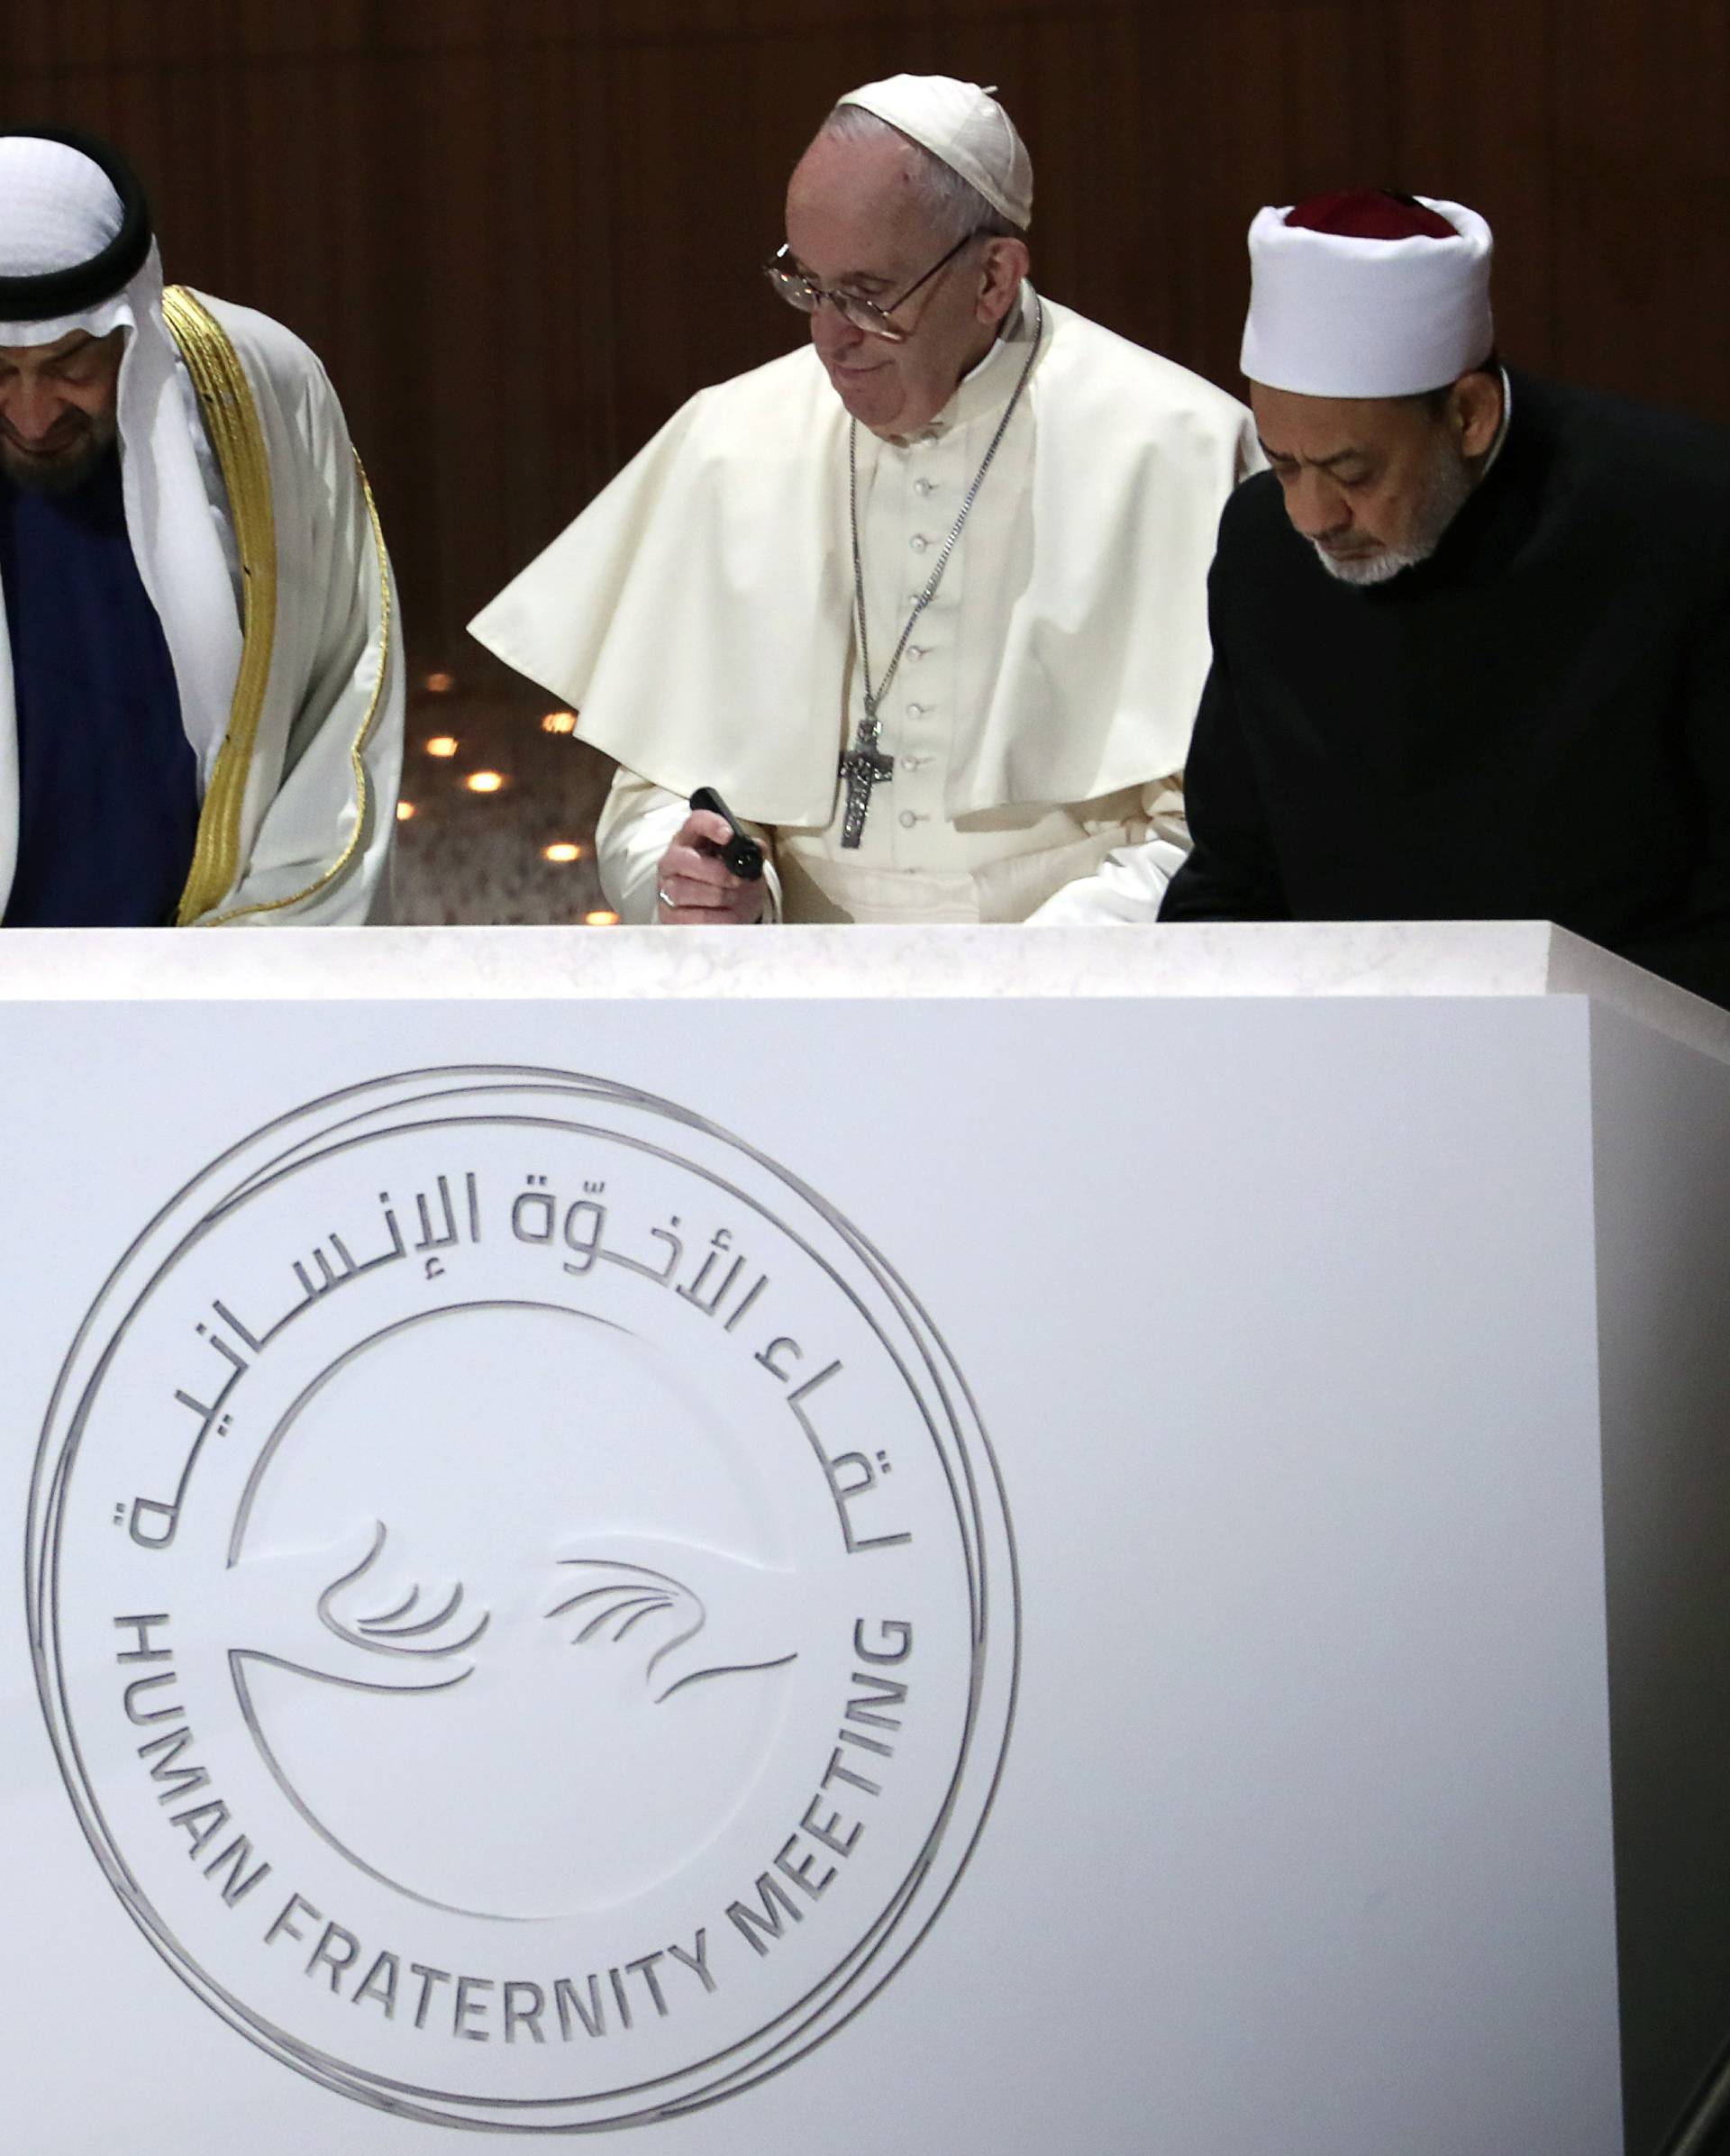 Pope Francis, Abu Dhabi's Crown Prince Mohammed bin Zayed Al-Nahyan and Grand Imam of al-Azhar Sheikh Ahmed al-Tayeb sign a document during an inter-religious meeting at the Founder's Memorial in Abu Dhabi